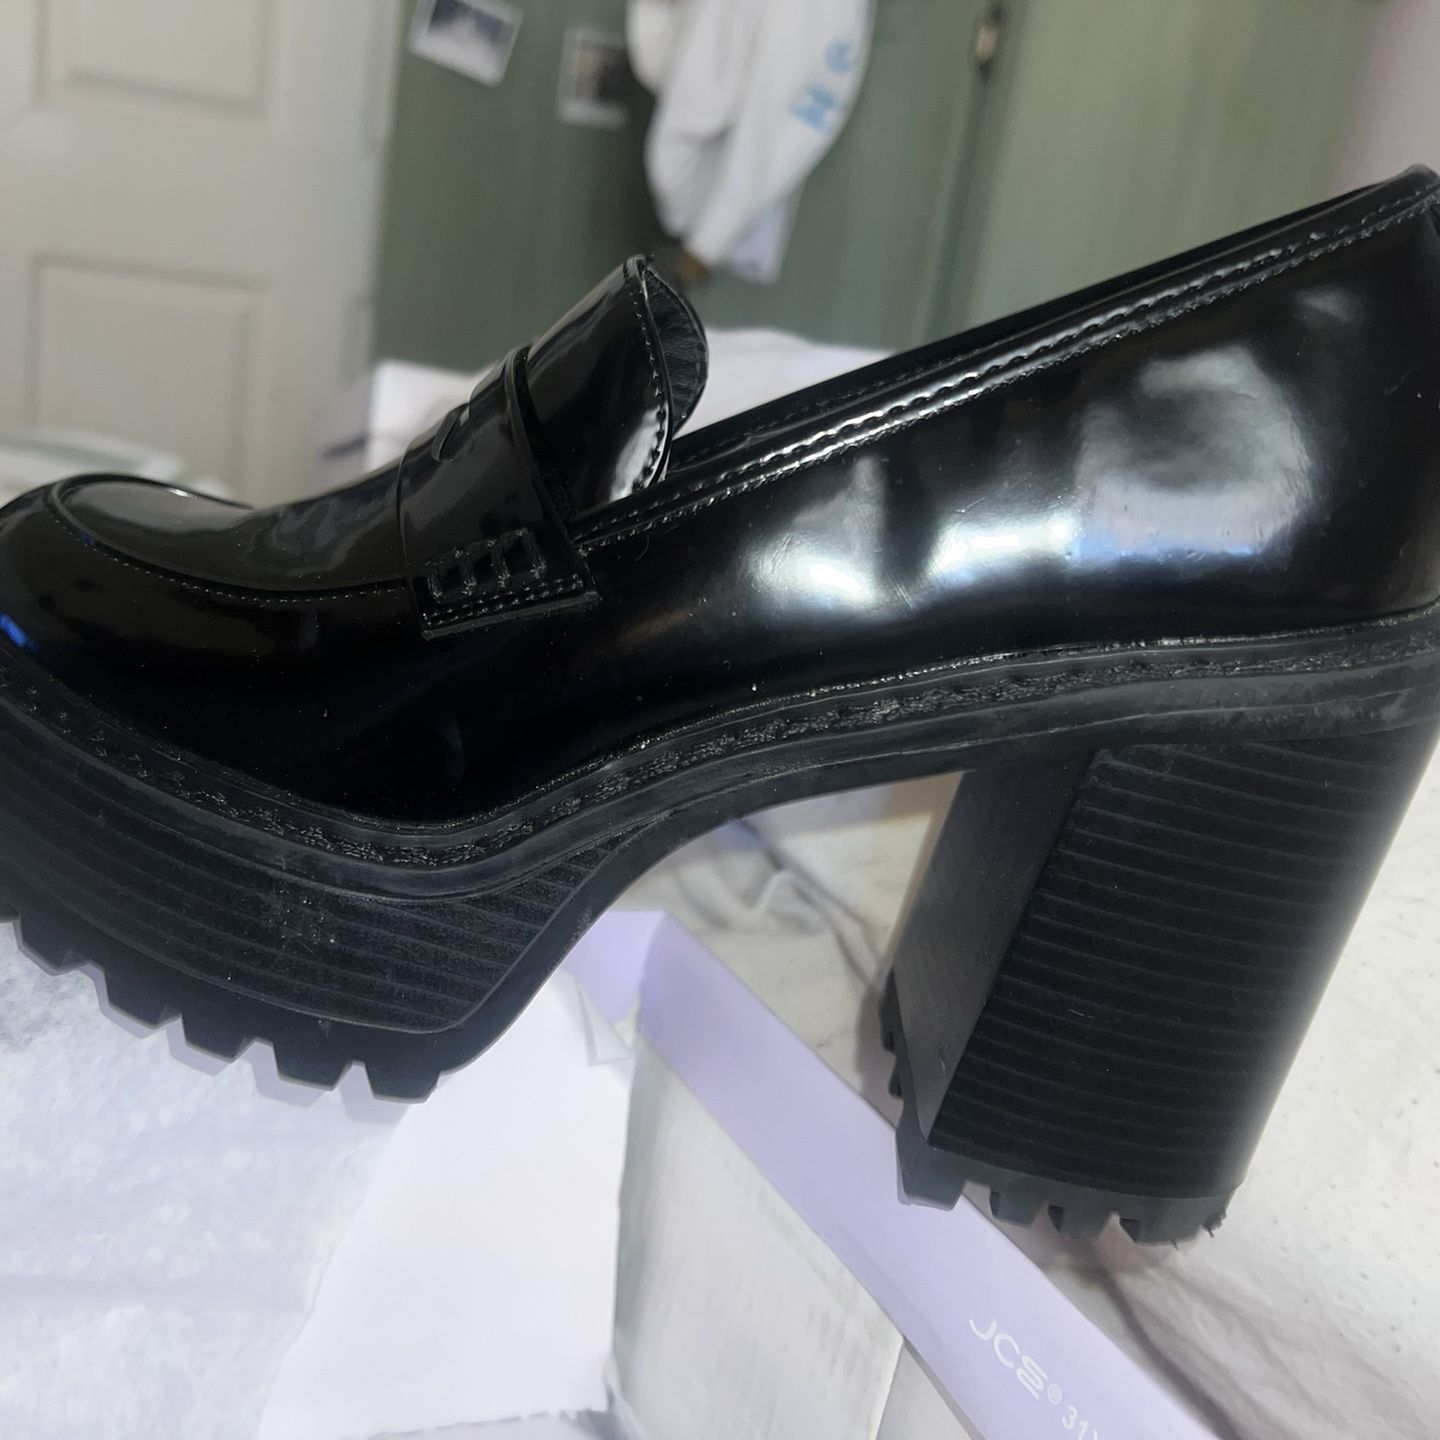 Christian Louis Vuitton Wedge Heels for Sale in Solana Beach, CA - OfferUp